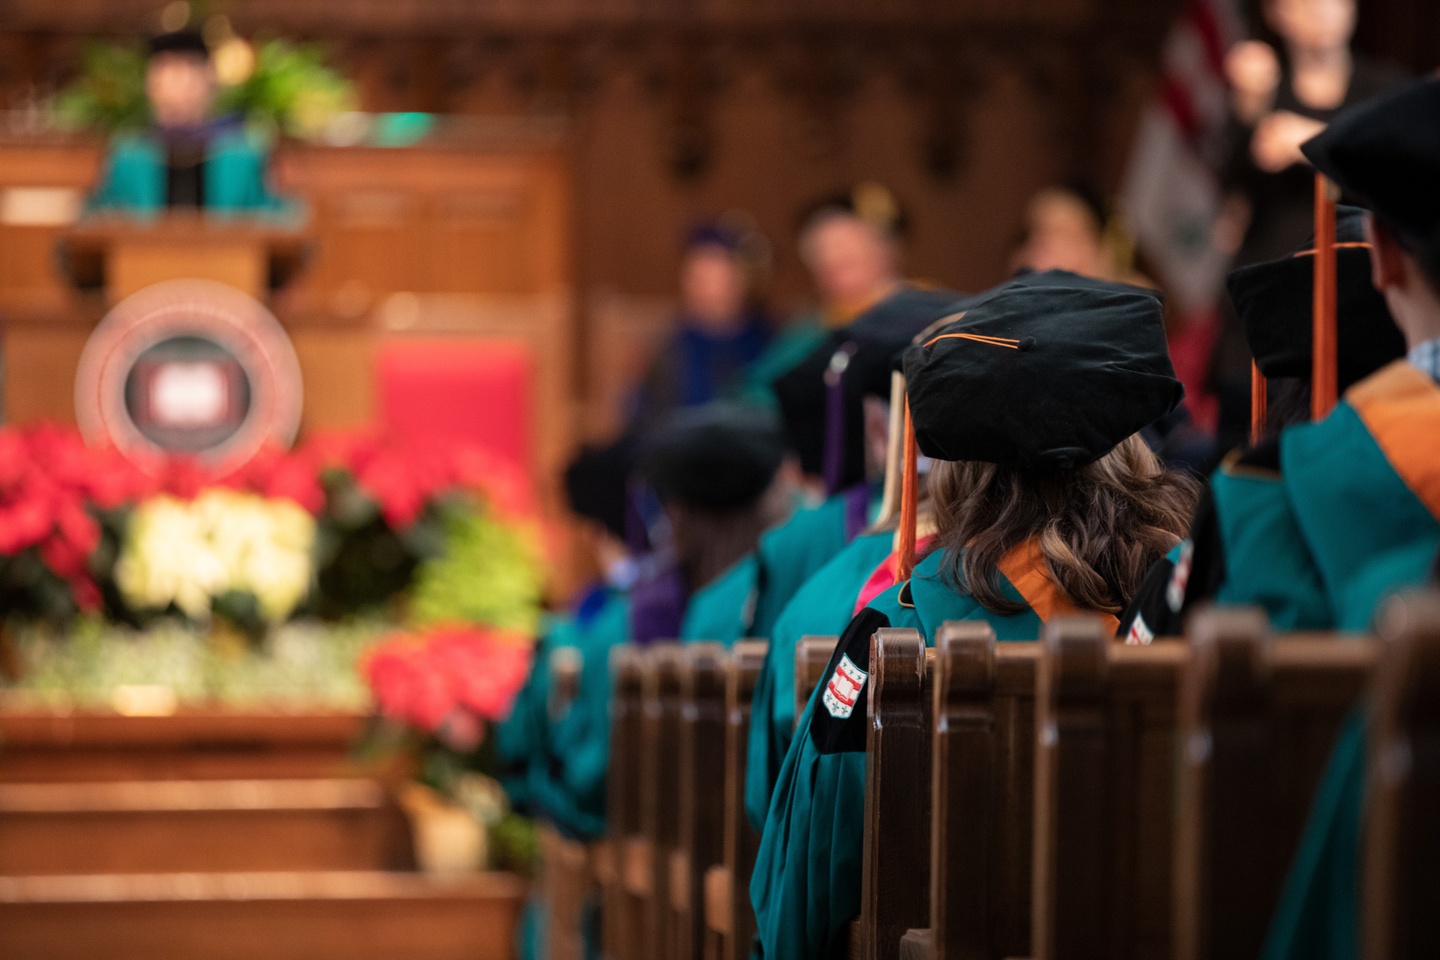 Rows of people in green graduation gowns with black mortarboards, seated in brown pews; there's a soft focus on the background, where someone in cap and gown stands at a podium.